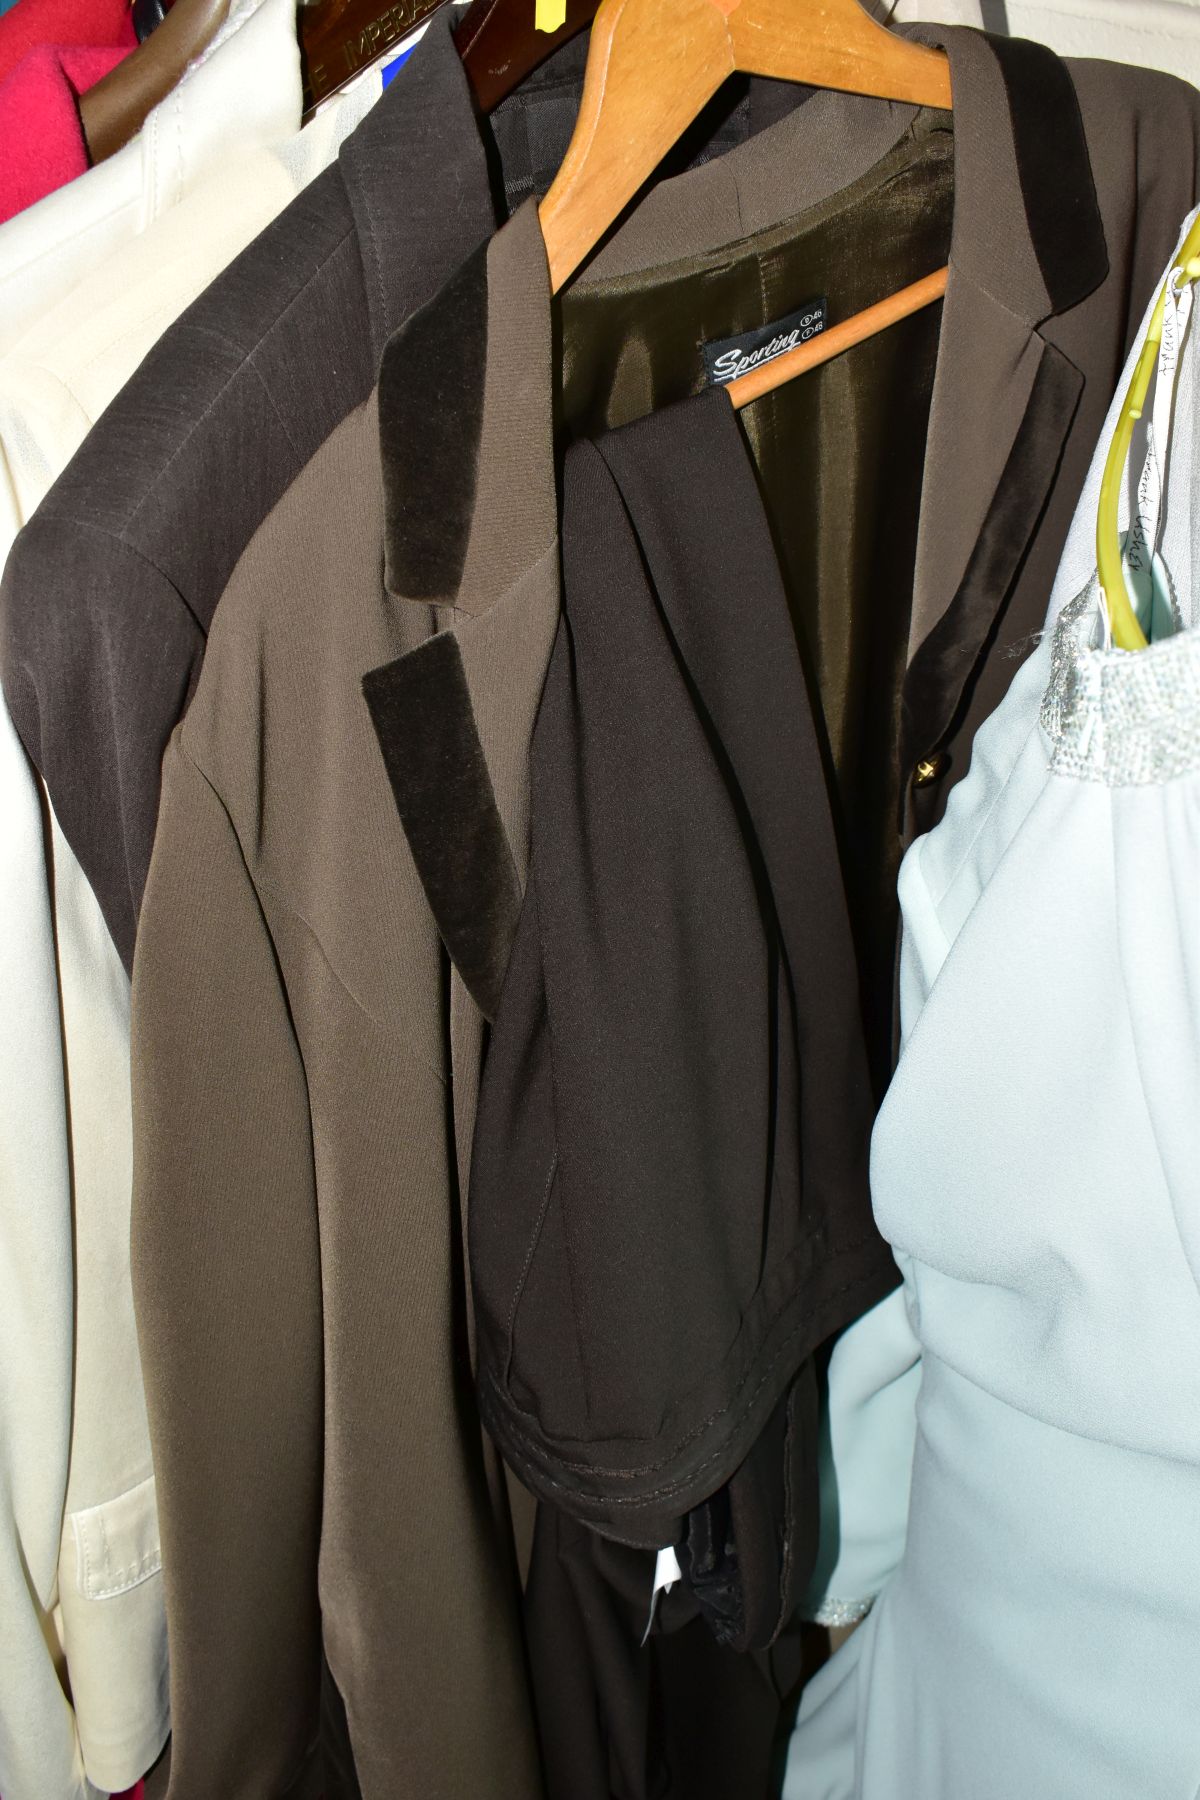 A QUANTITY OF LADIES CLOTHING ETC, to include coats, jackets blouses and jumpers etc brands - Image 7 of 14